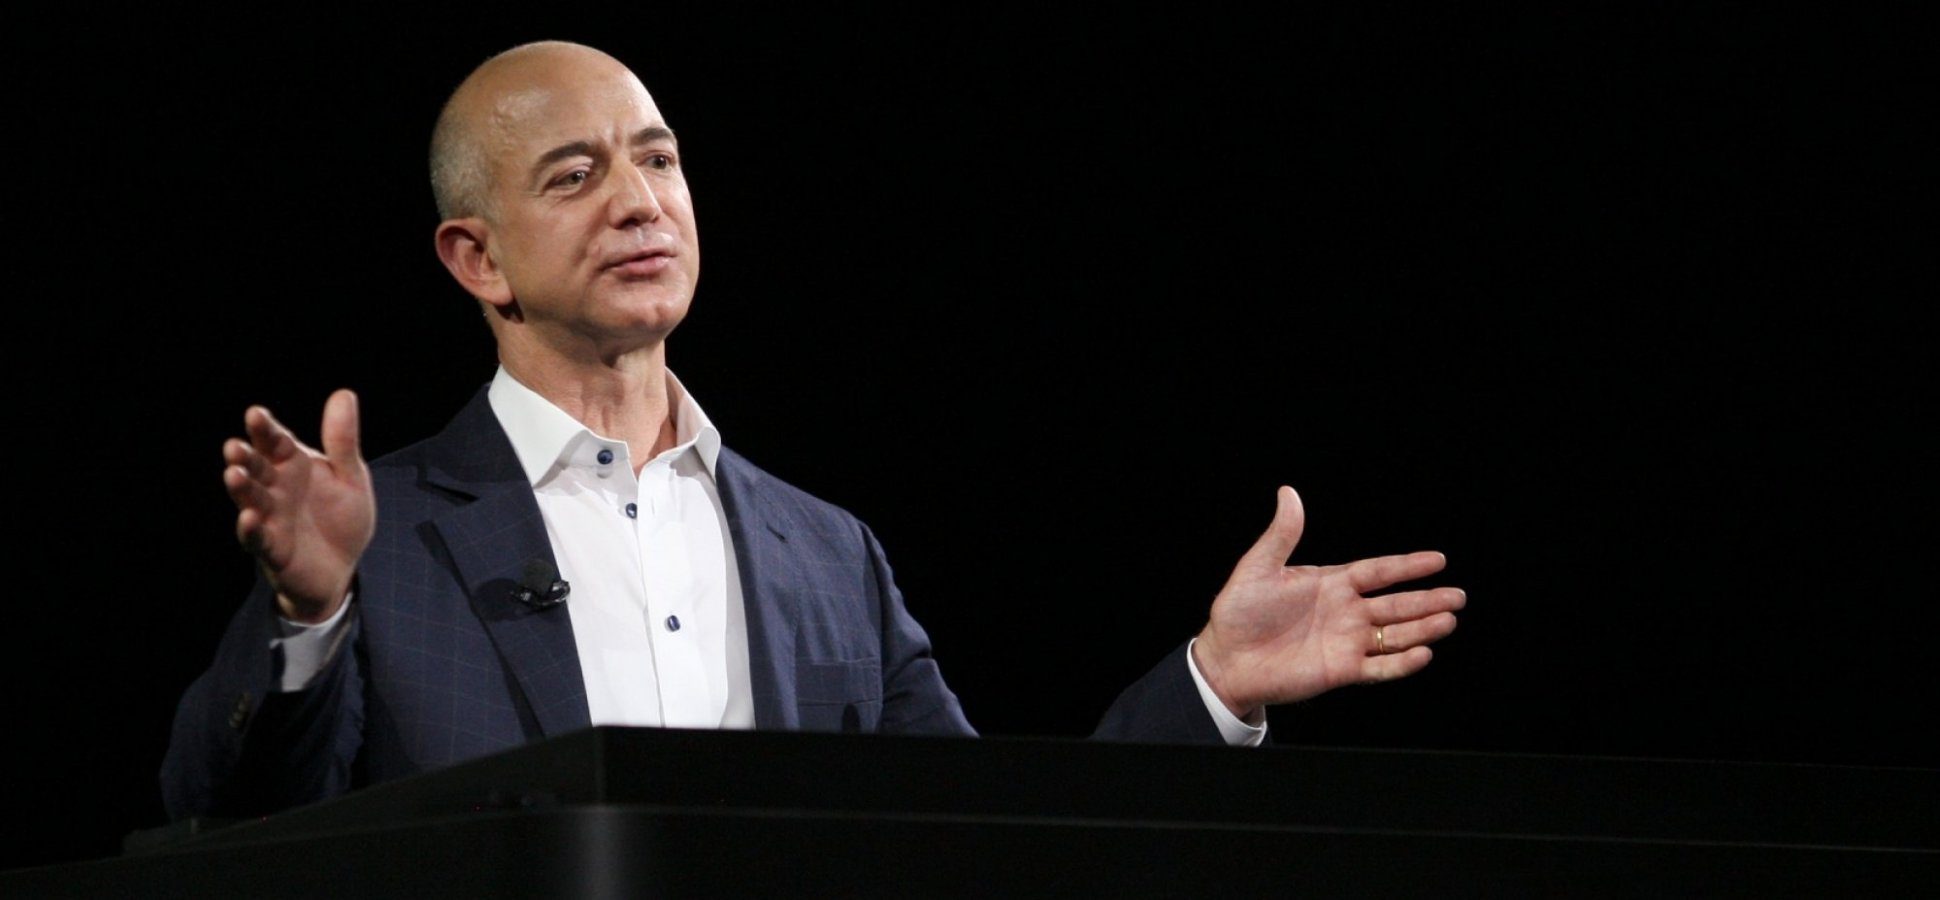 Jeff Bezos Email: The Best Amazon Contact Email For Handling Issues